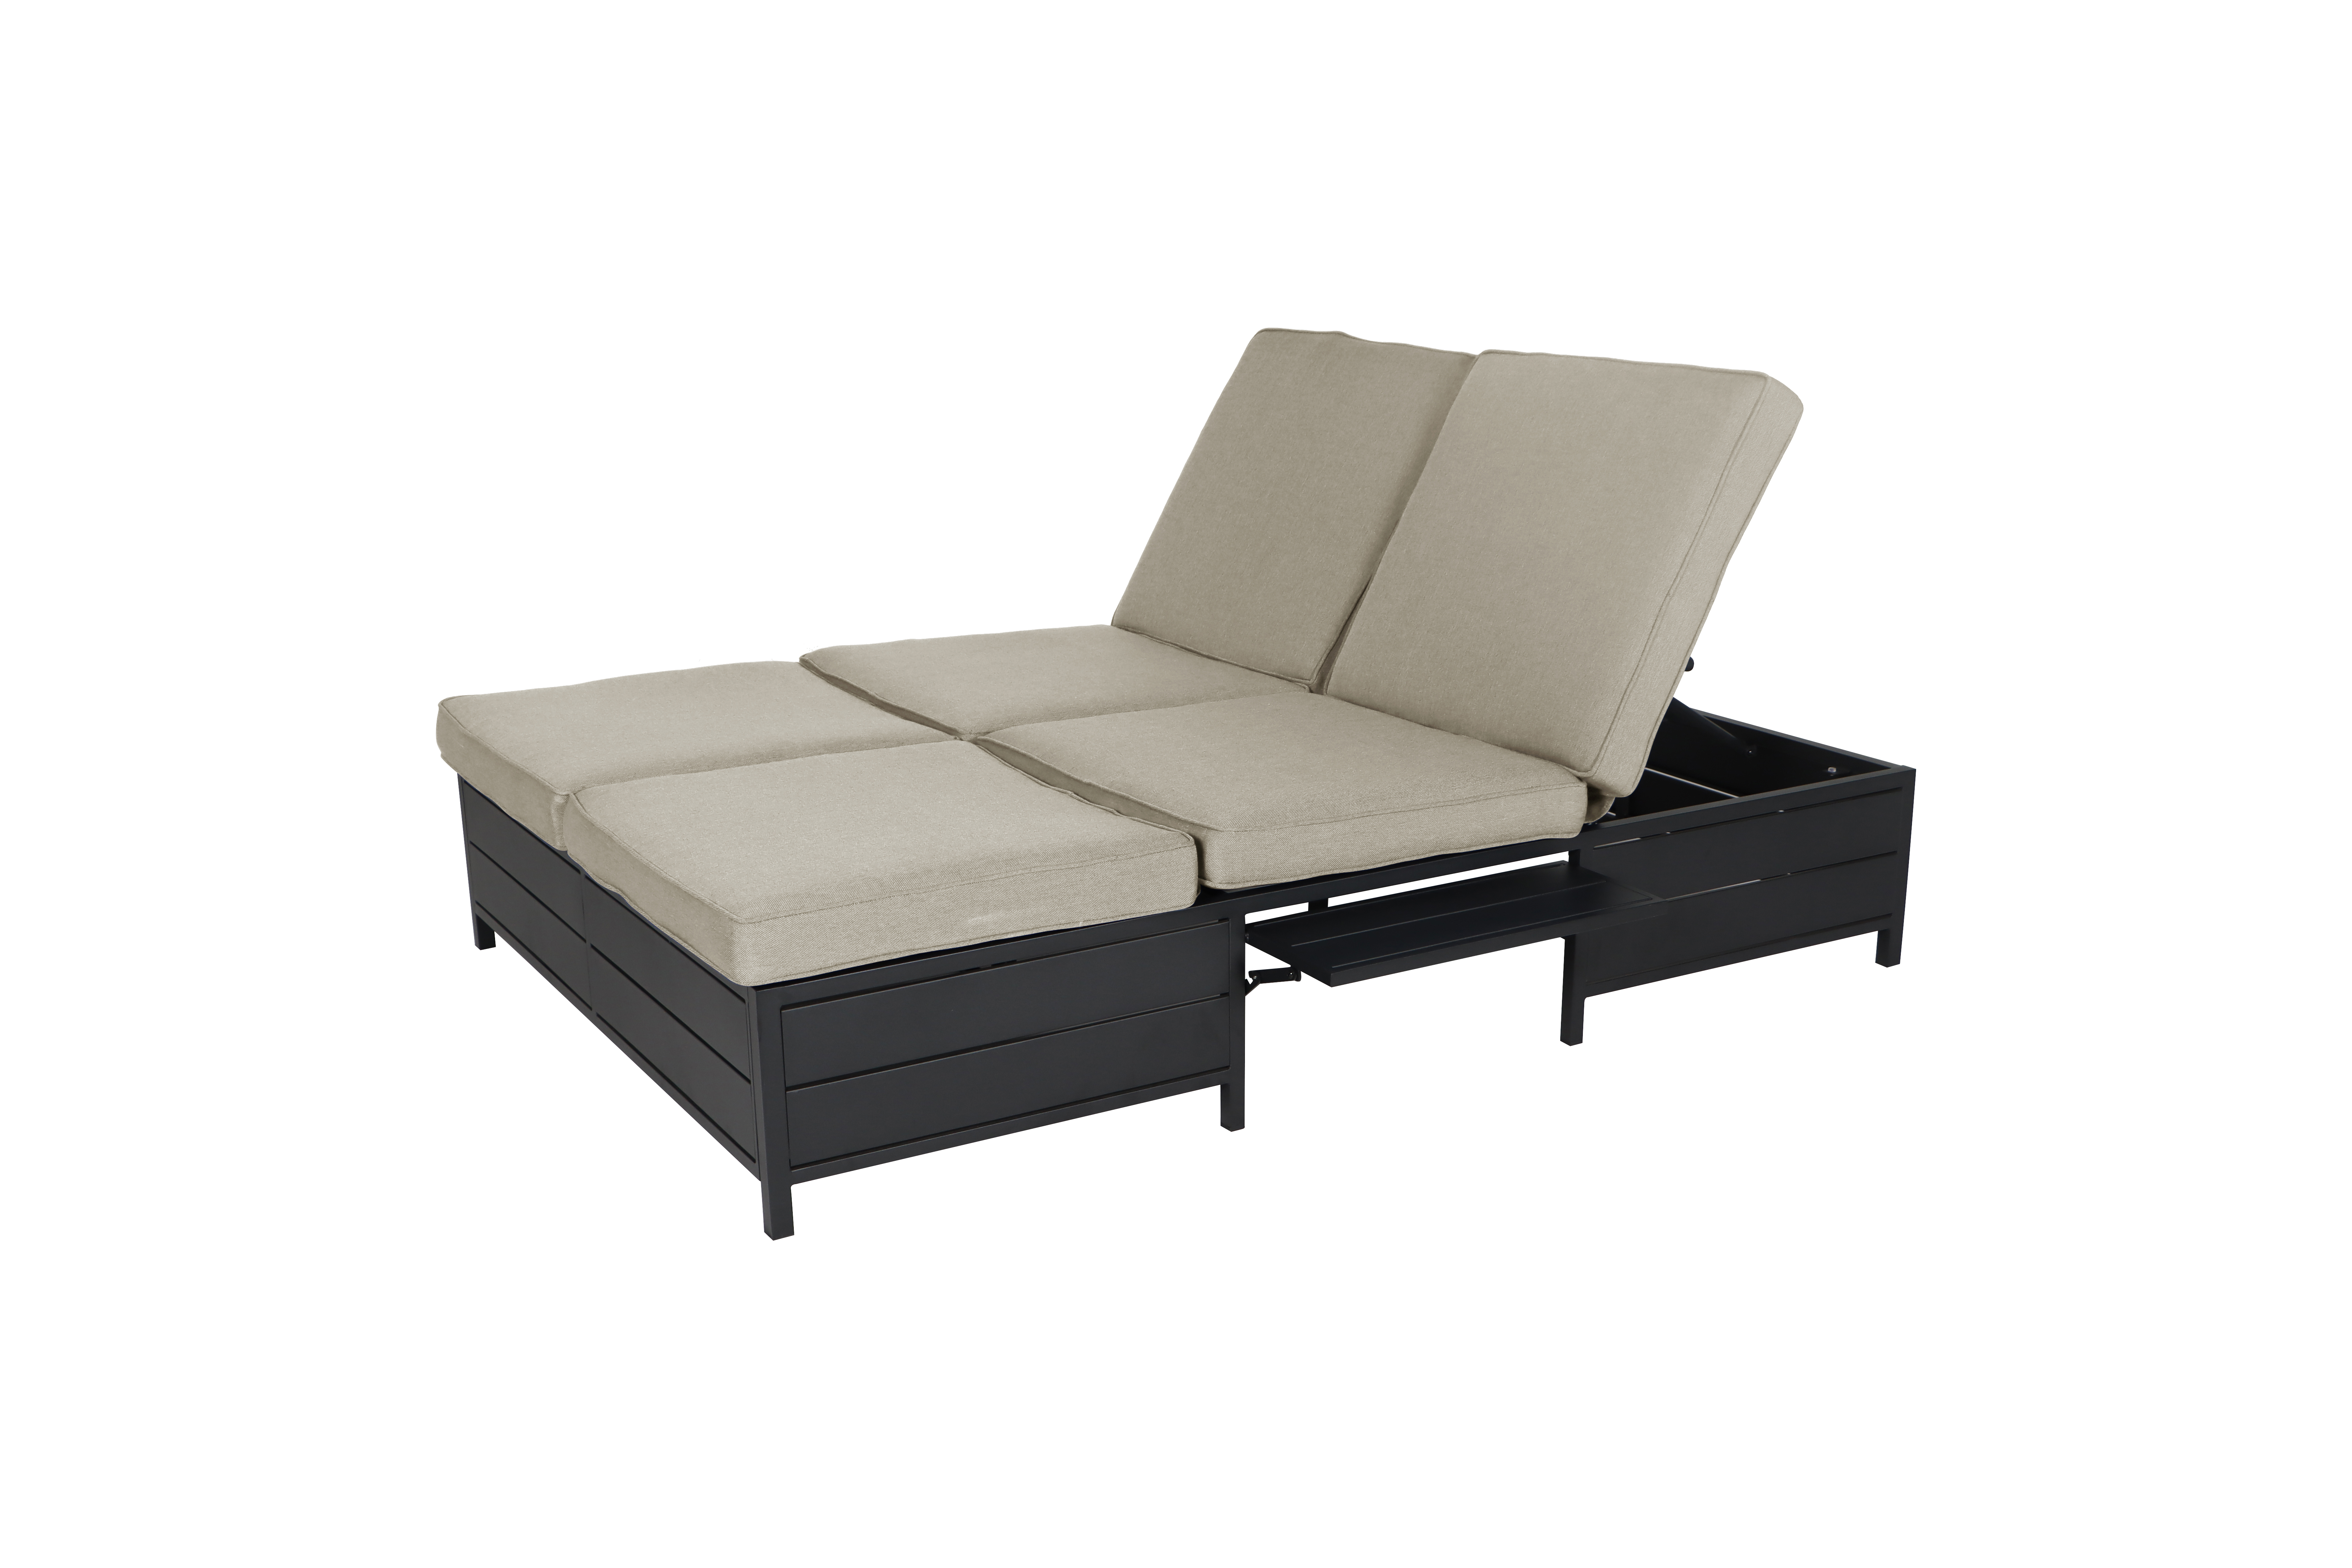 Mainstays Cushion Steel Outdoor Chaise Lounge - Tan/Black - image 5 of 5